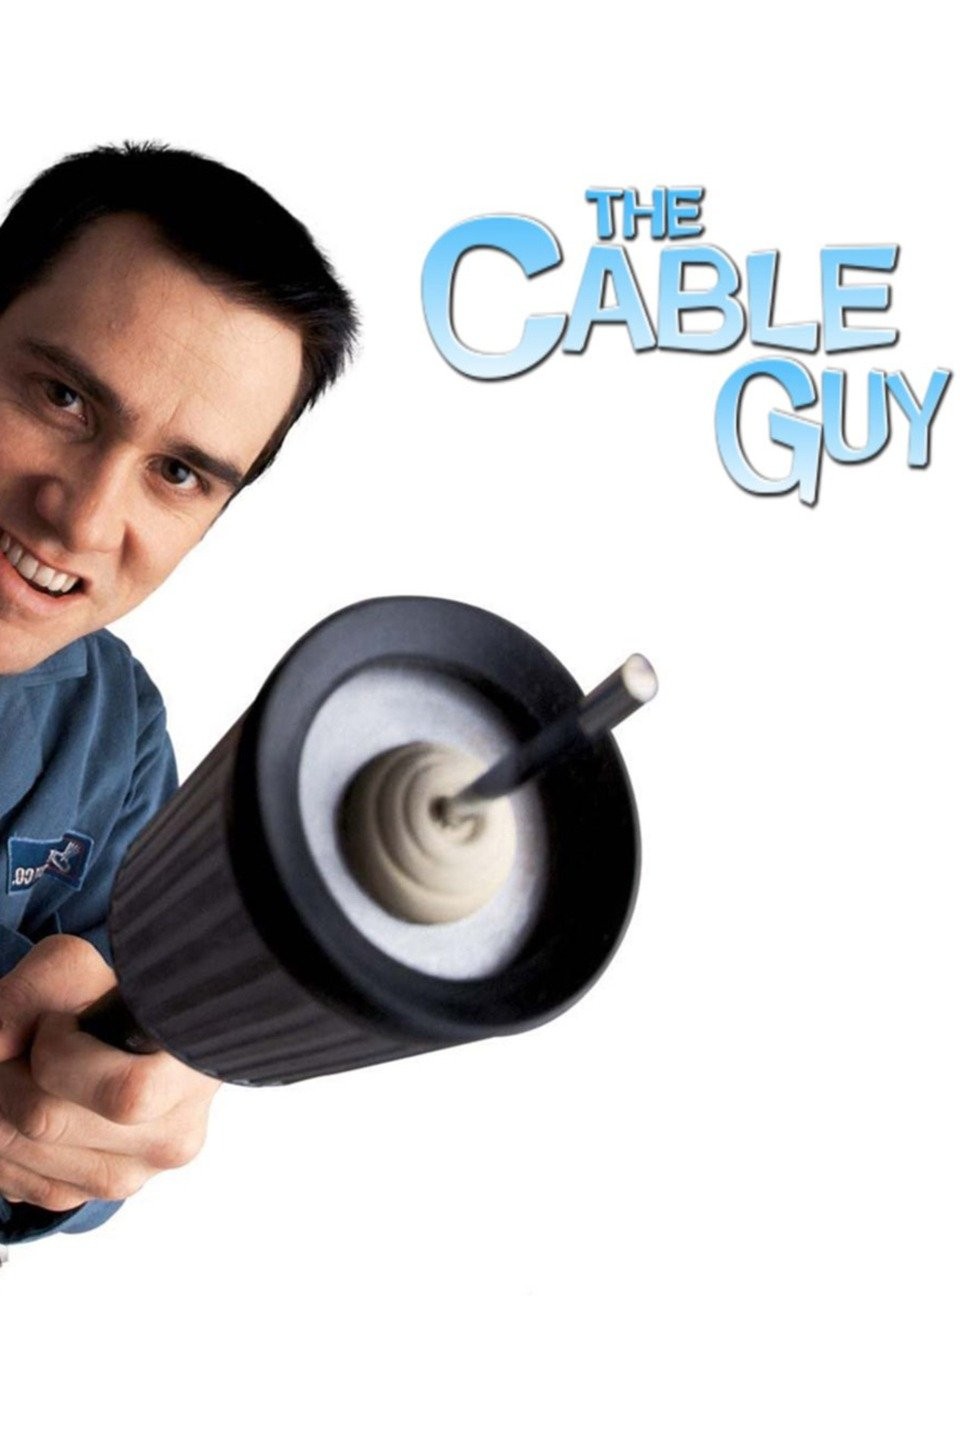 The Cable Guy 2 - Will It Ever Happen?